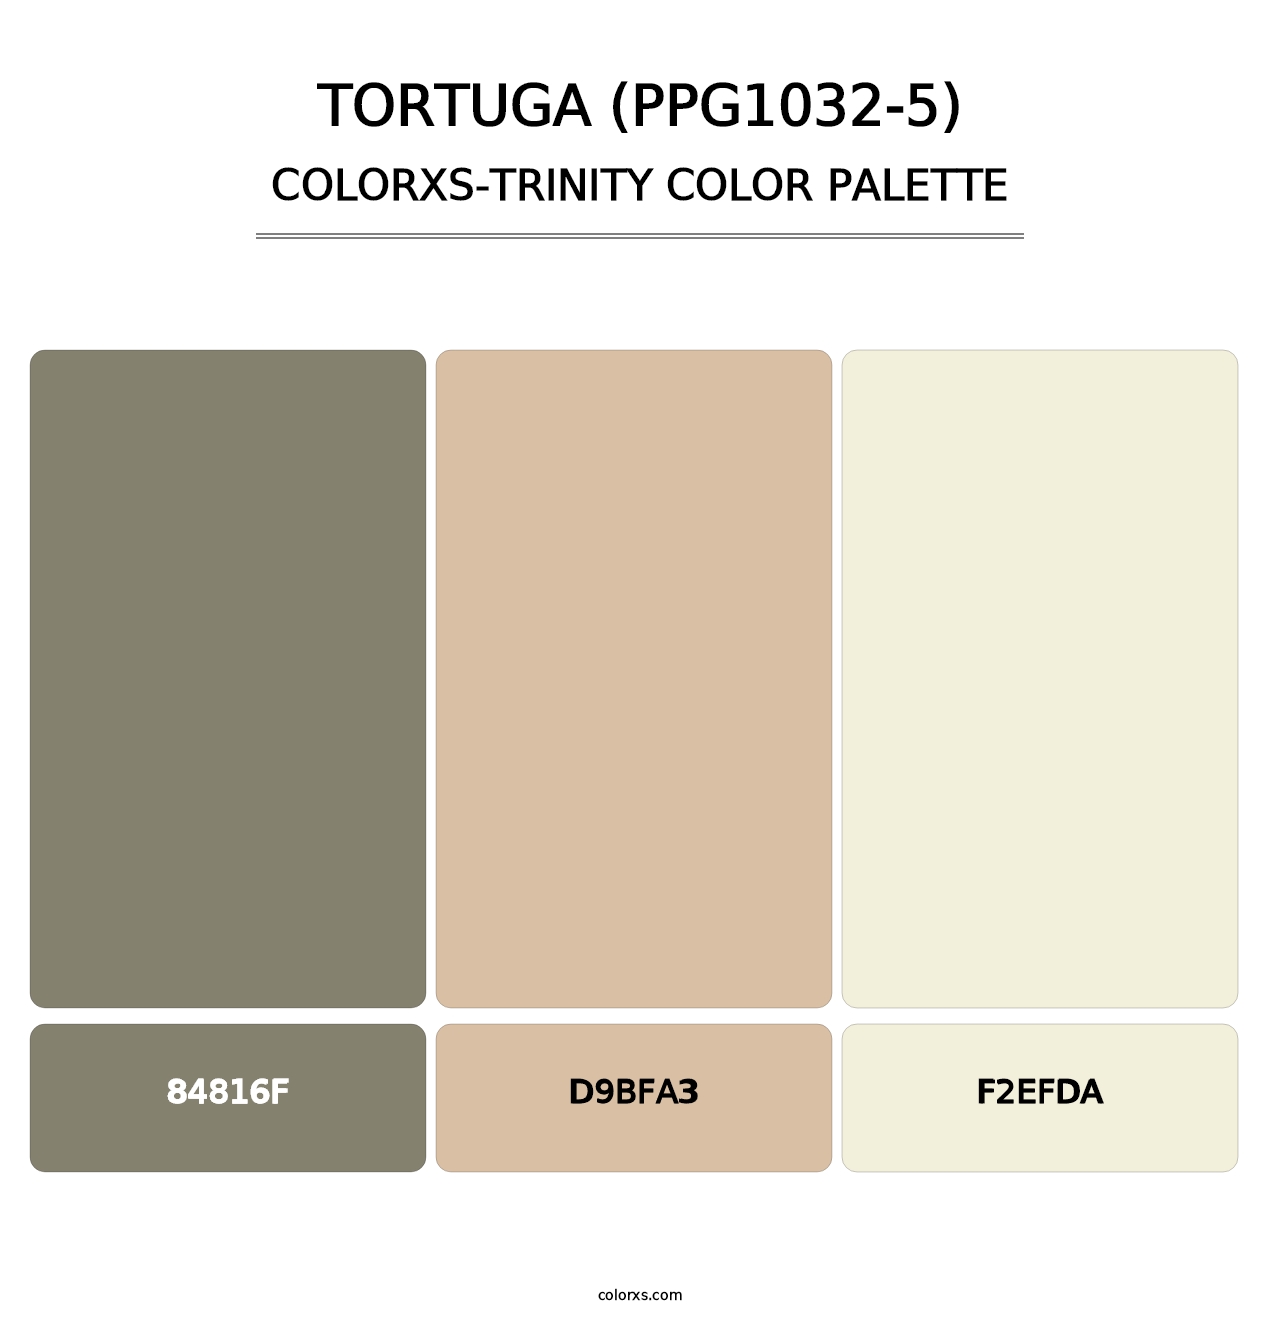 Tortuga (PPG1032-5) - Colorxs Trinity Palette